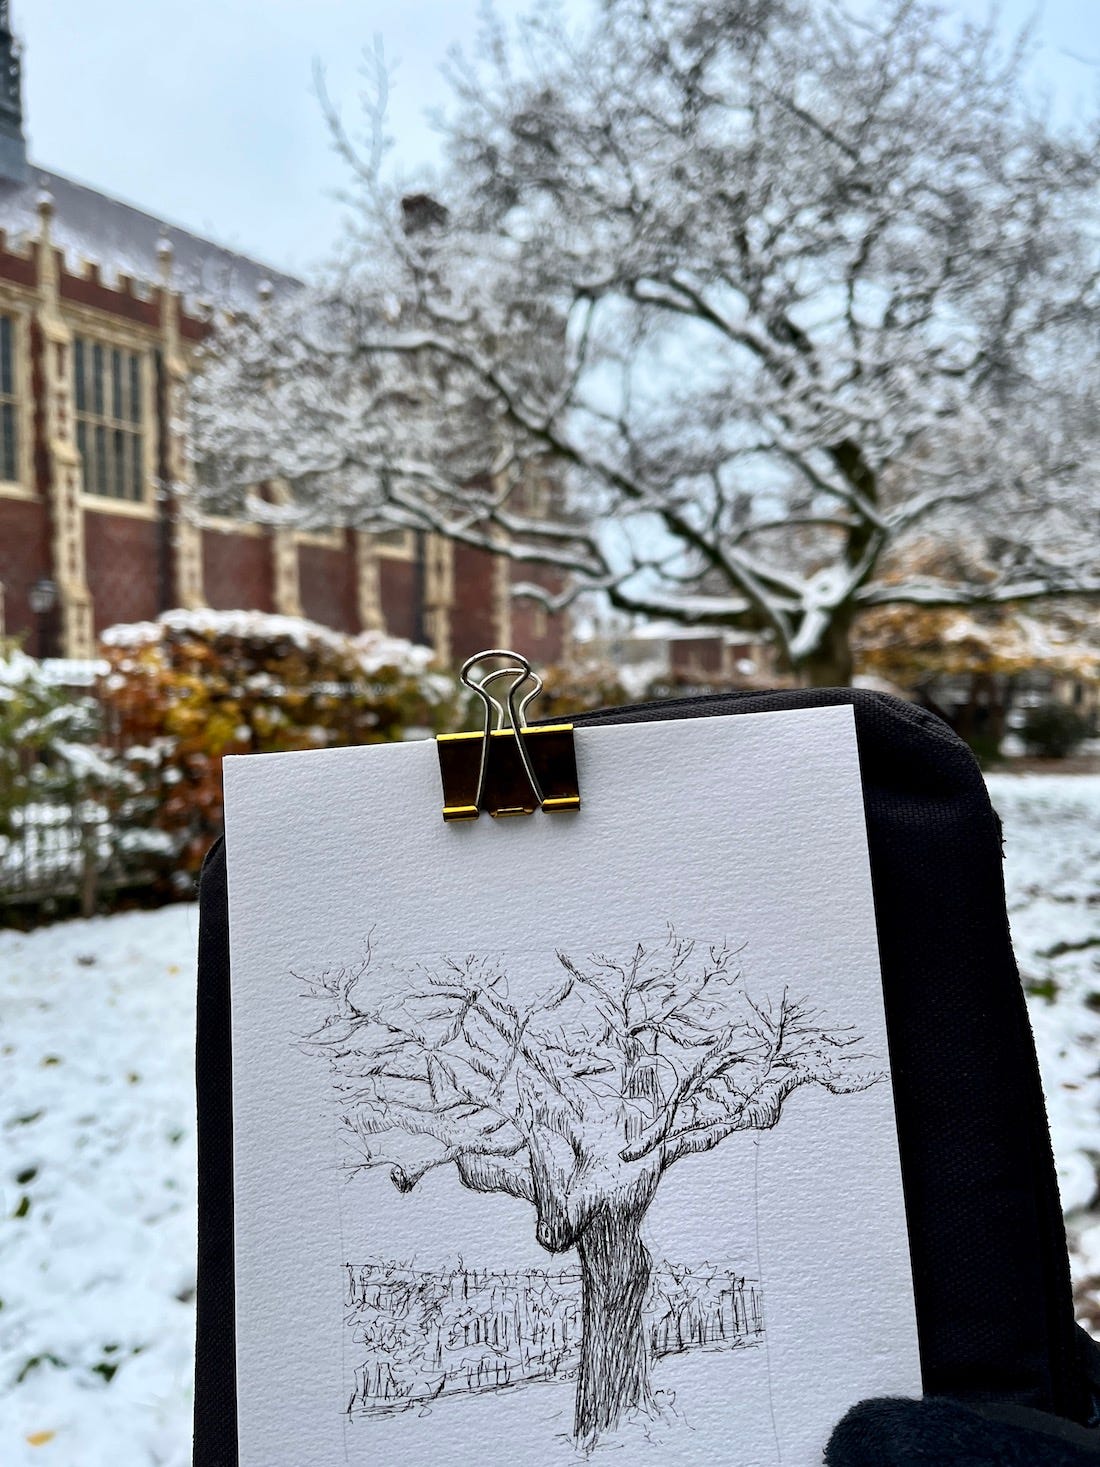 Image: Line drawing of a snowy, wintry scene at a park in London. The focus is on a tree with sprawling branches, covered in snow. Vintage-looking iron fences framed the background. 